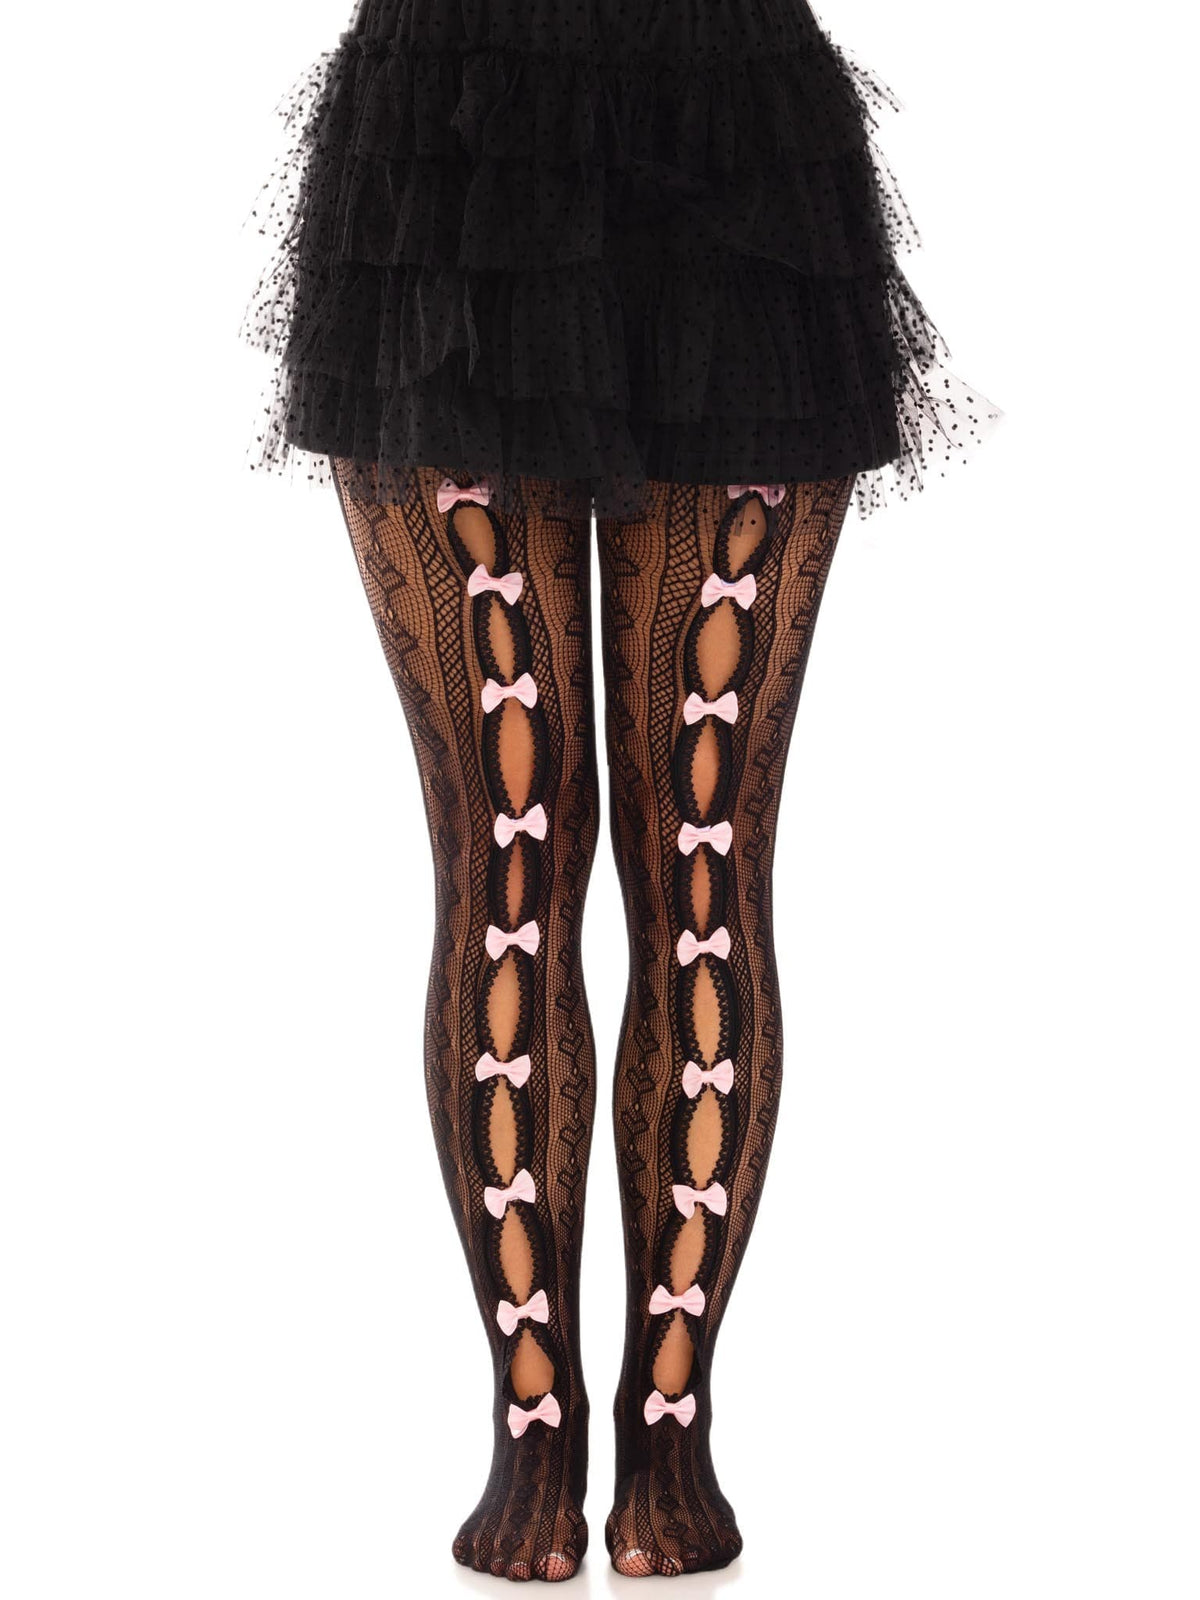 Sweetheart Striped Net Tights With Keyhole and  Mini Bow Detail - One Size - Black